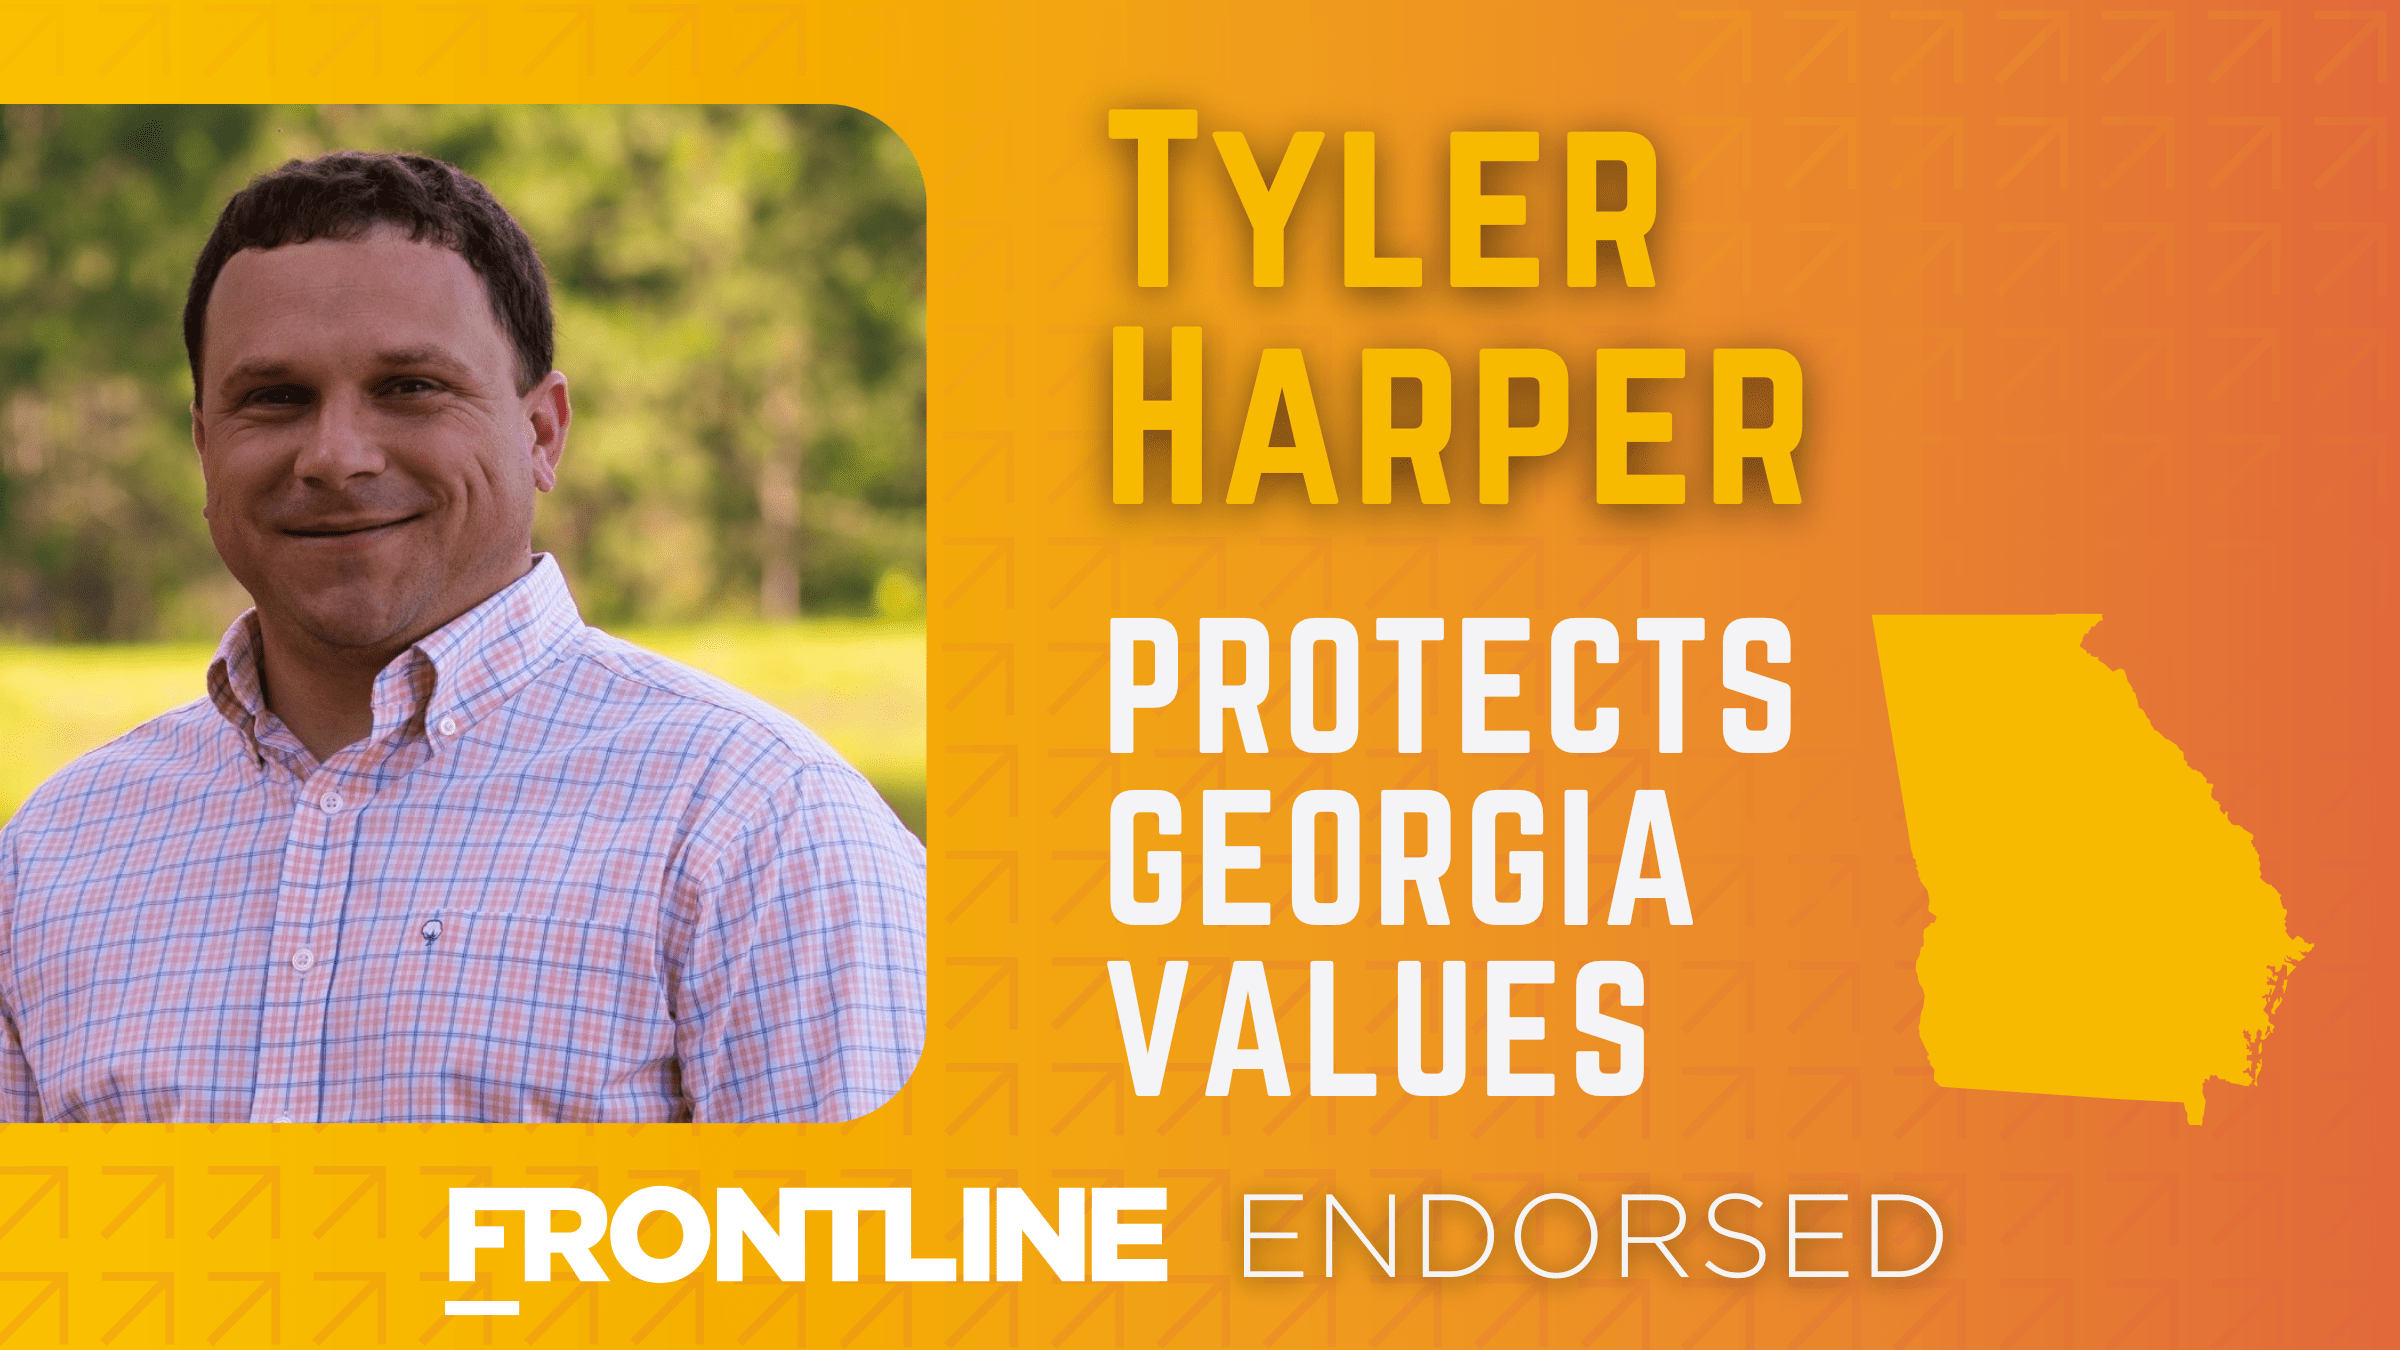 Stand with our Farmers and Vote Tyler Harper!